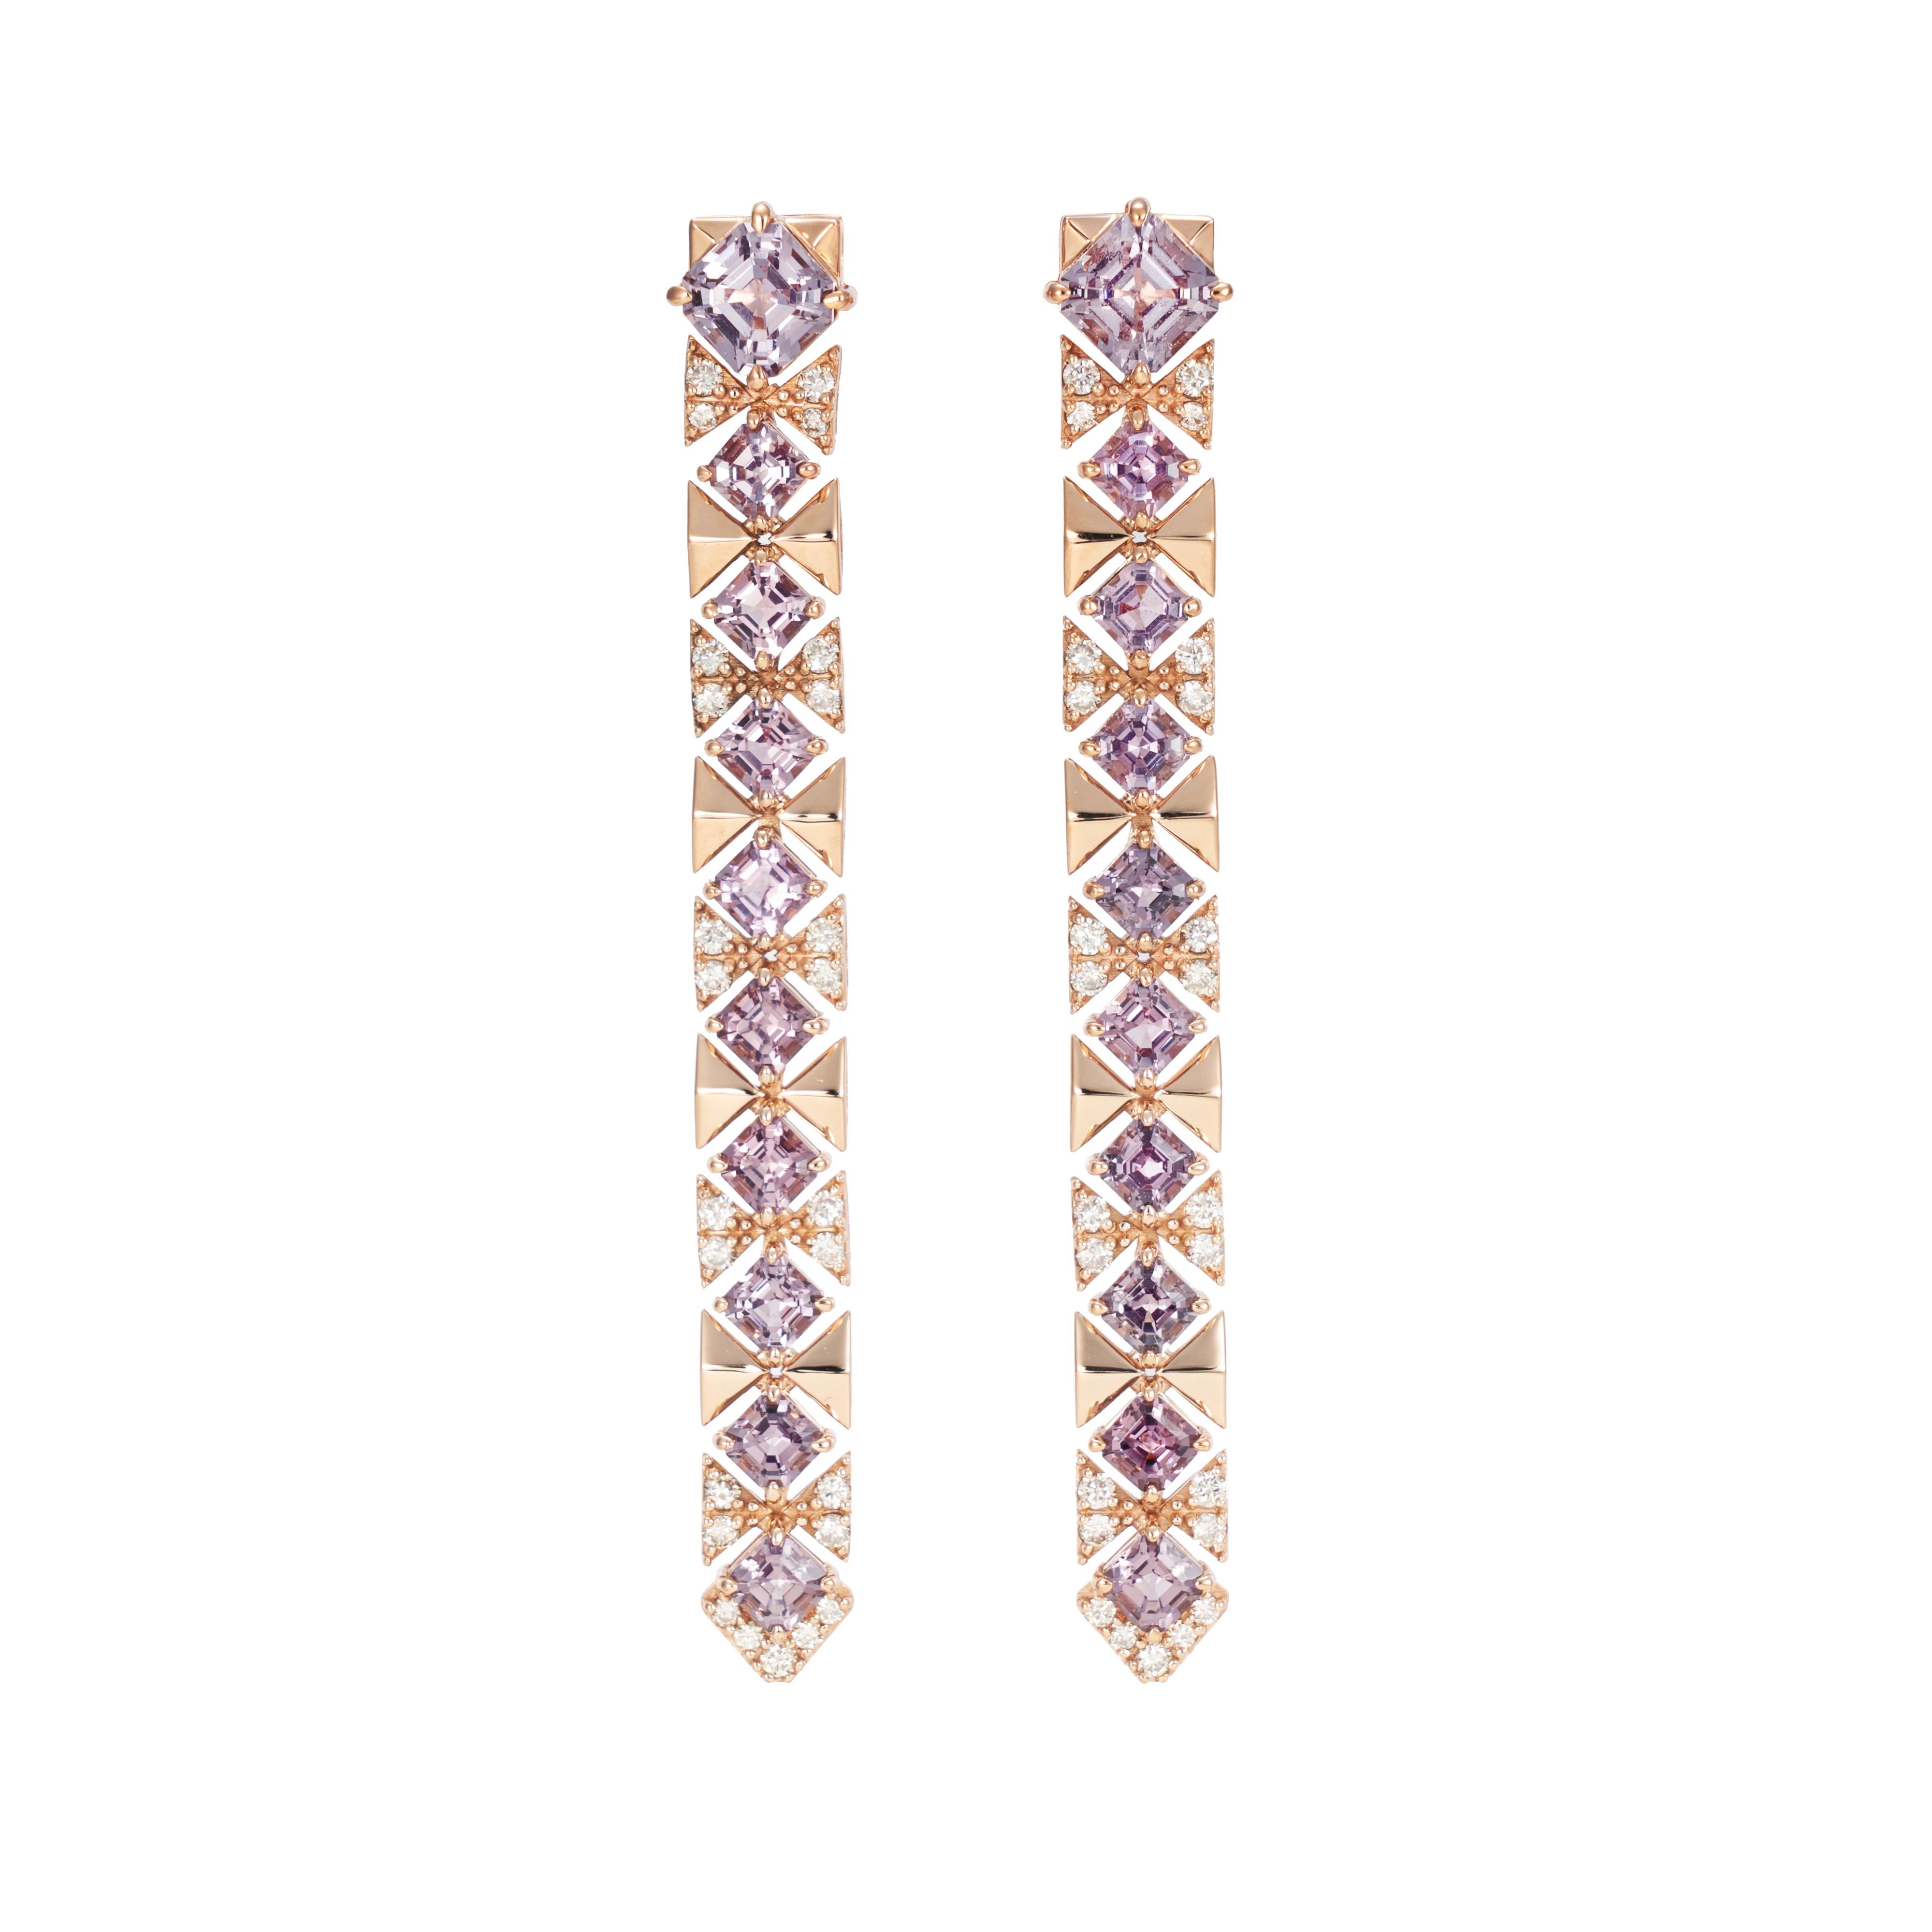 Light and easy to wear these earrings showcase multicolor fancy cut spinels accented with  diamonds. These earrings are dainty yet have a great pop of color from the vibrant gems.

Multicolor Ombre Spinel Earrings with Diamond in 18 Karat Rose